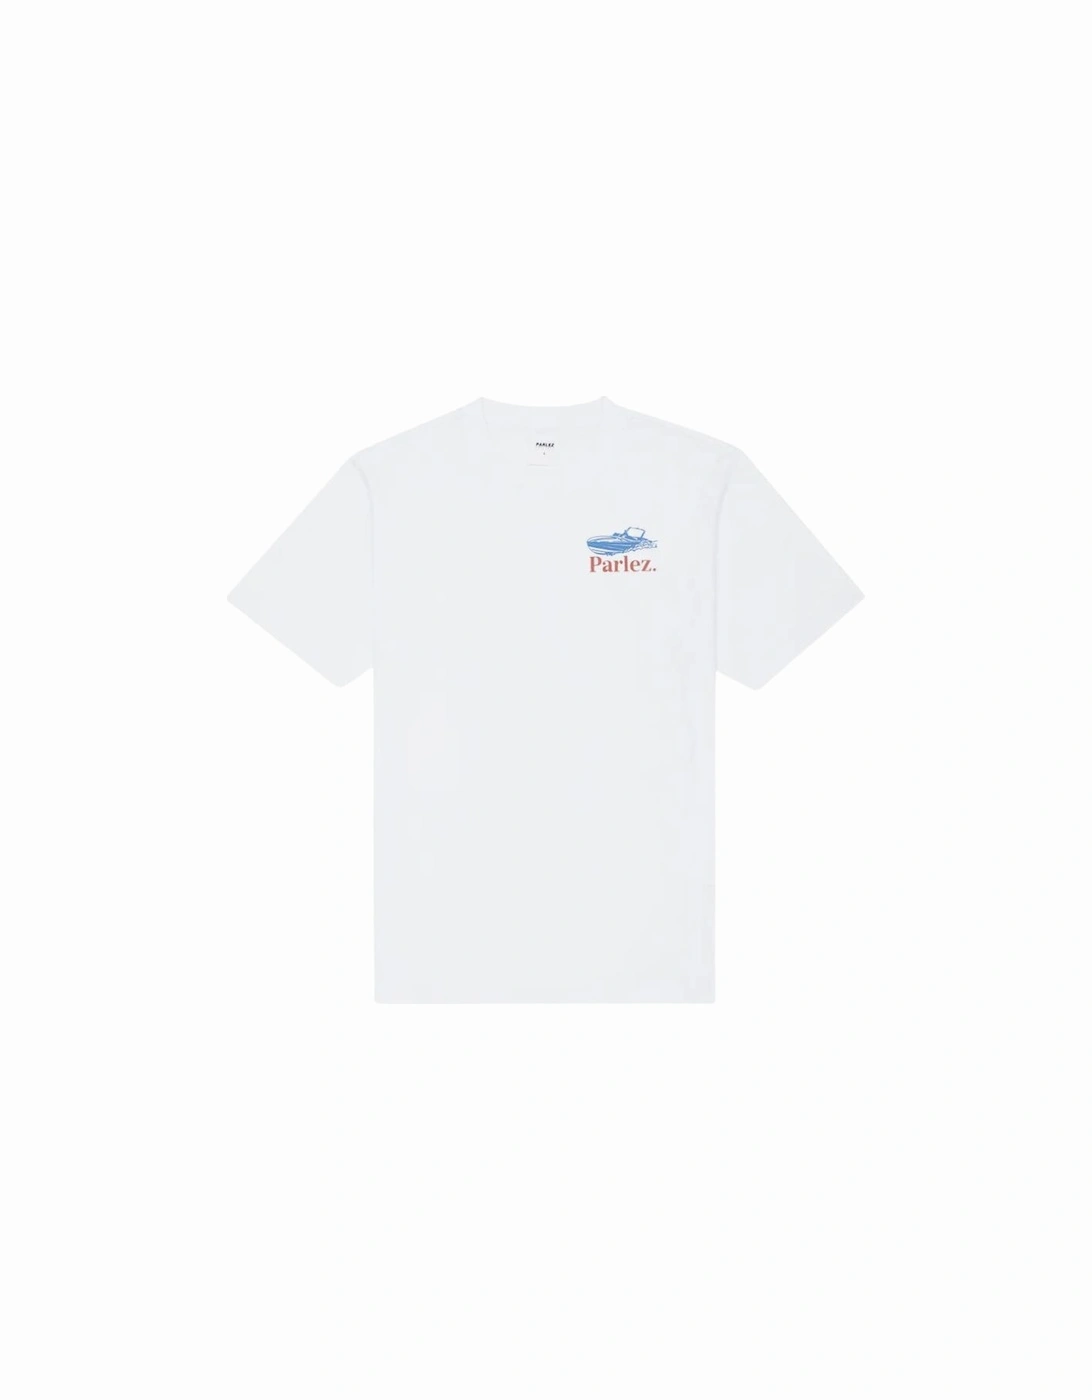 Sol T-Shirt - White, 7 of 6